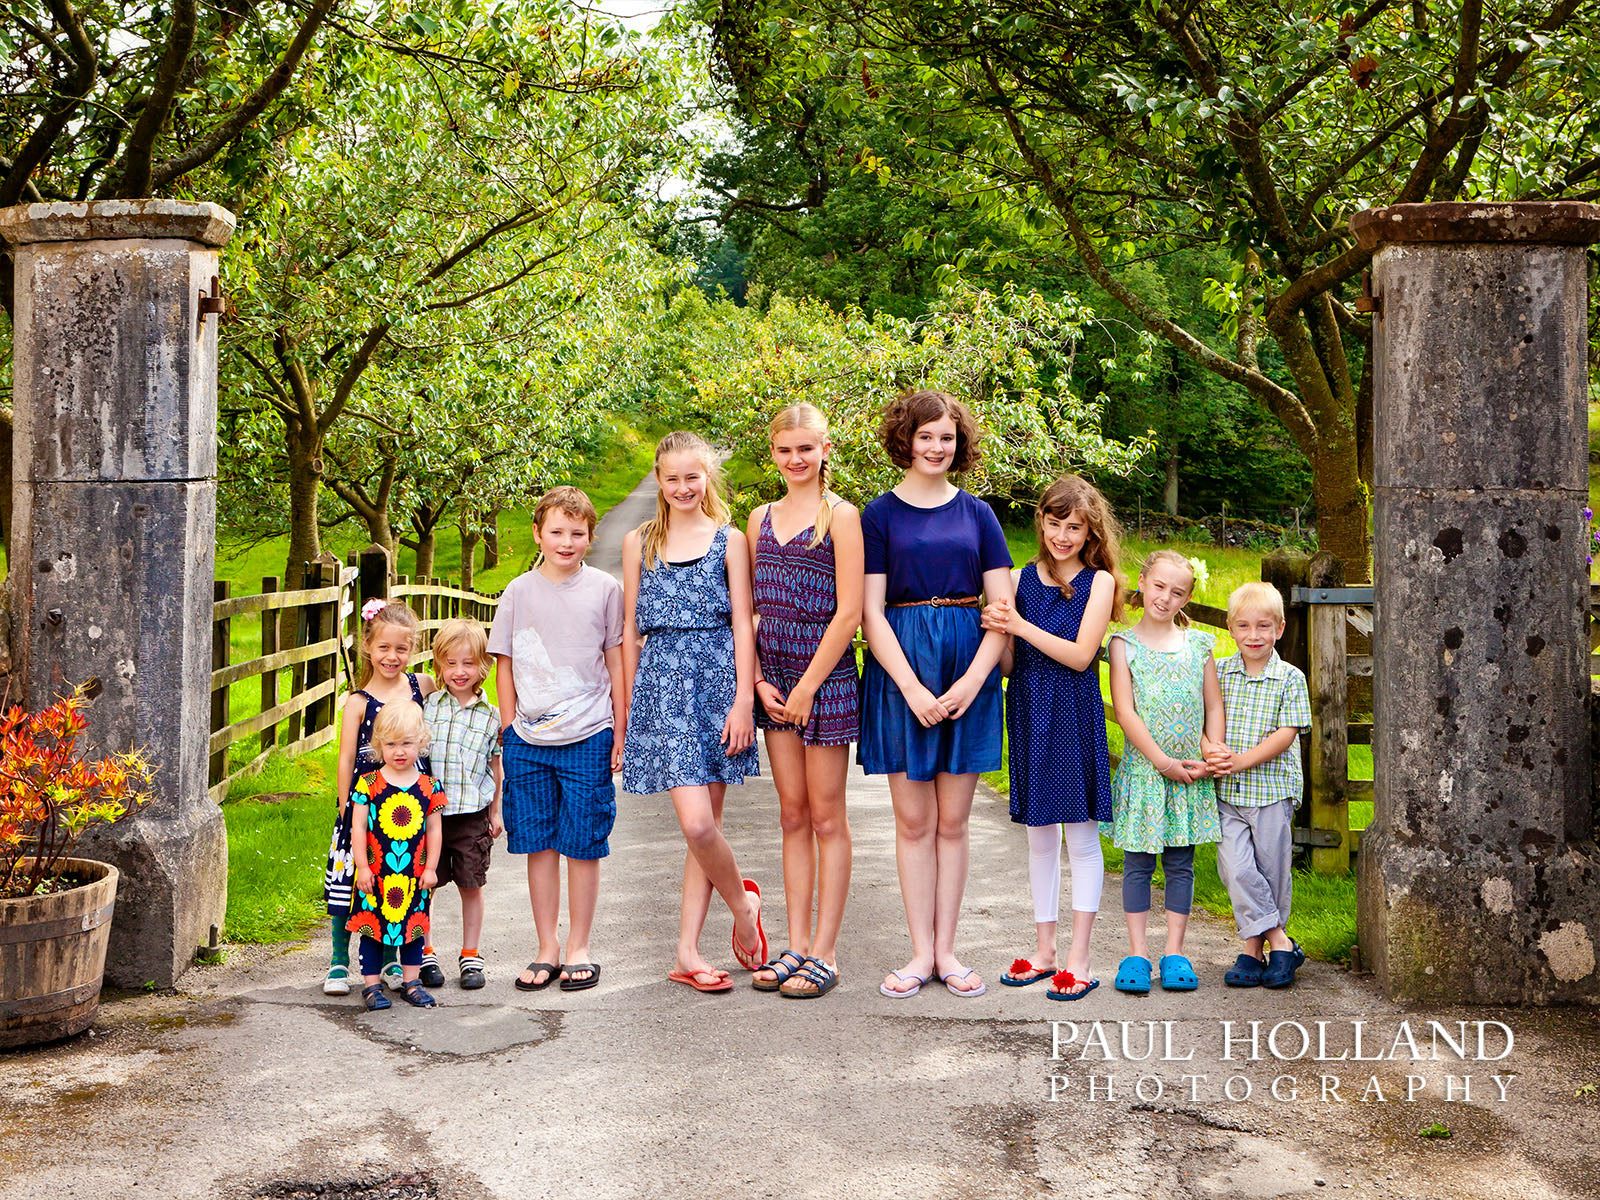 Outdoor Photo Shoot - Group/Family